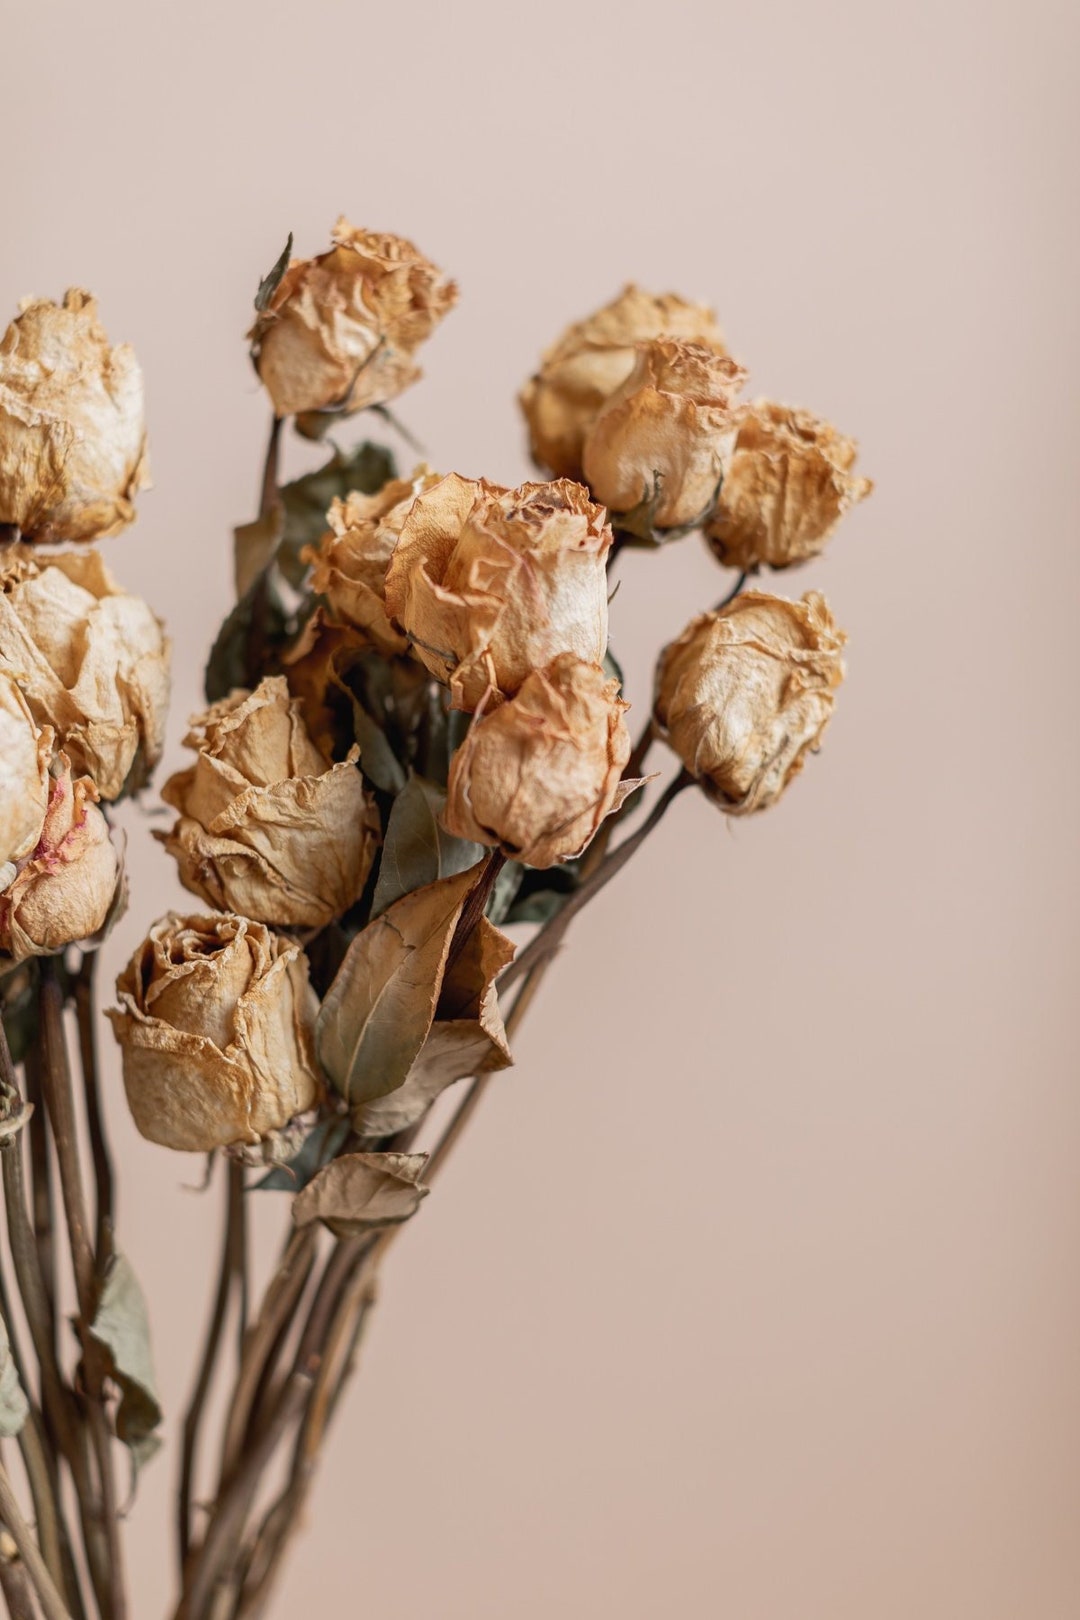 Moroccan High quality dried rose buds ,100%natural Moroccan Rose